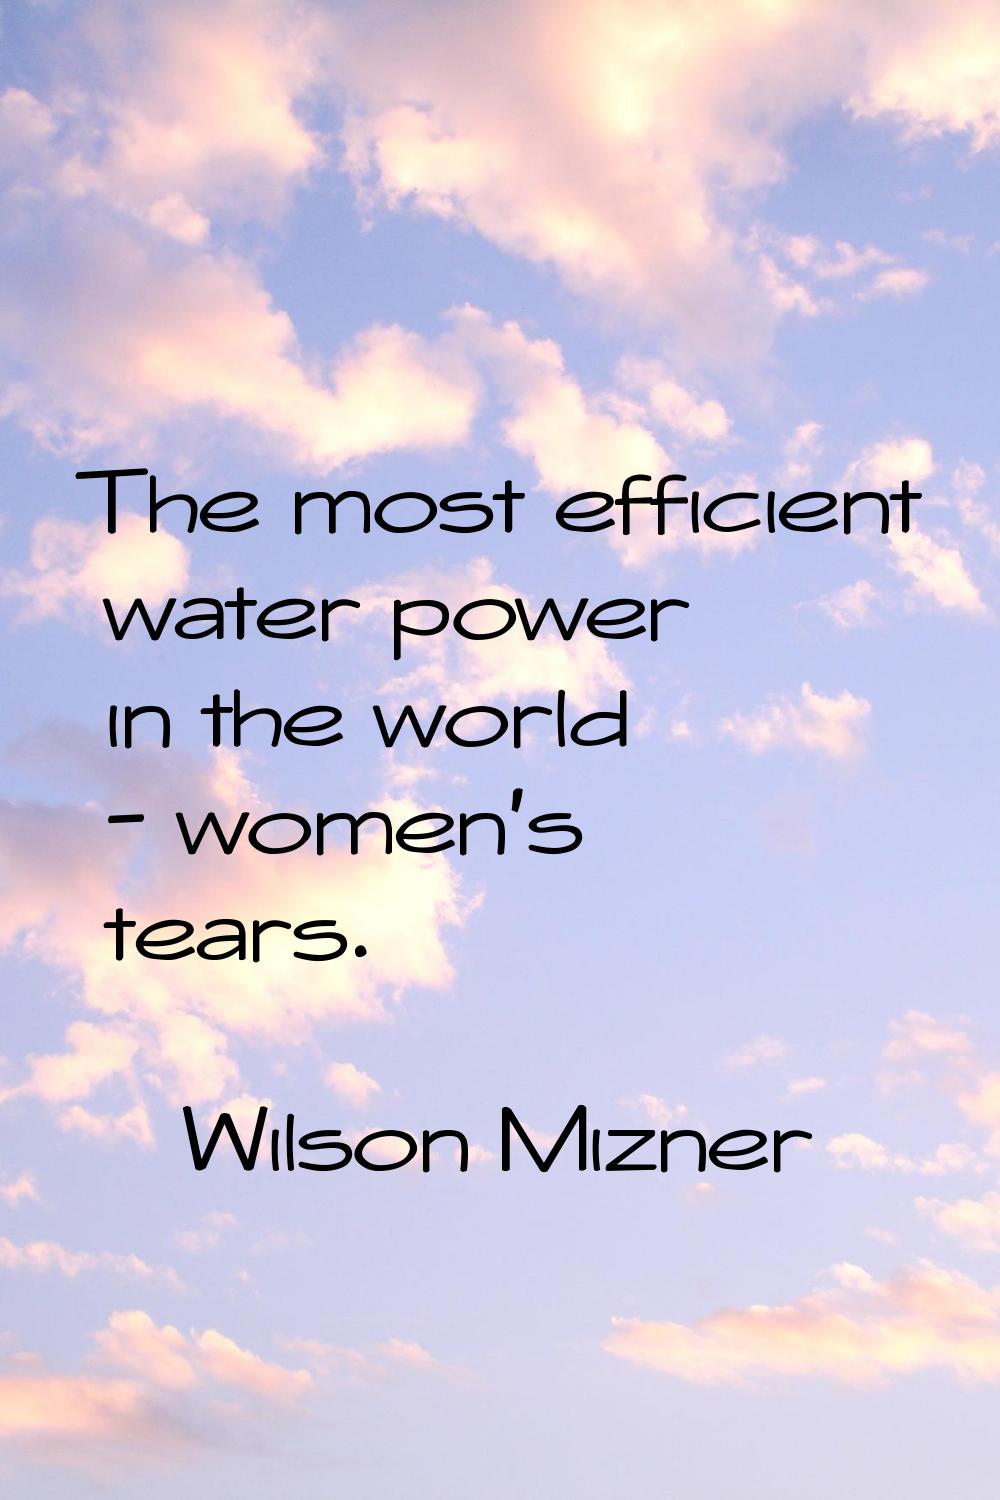 The most efficient water power in the world - women's tears.